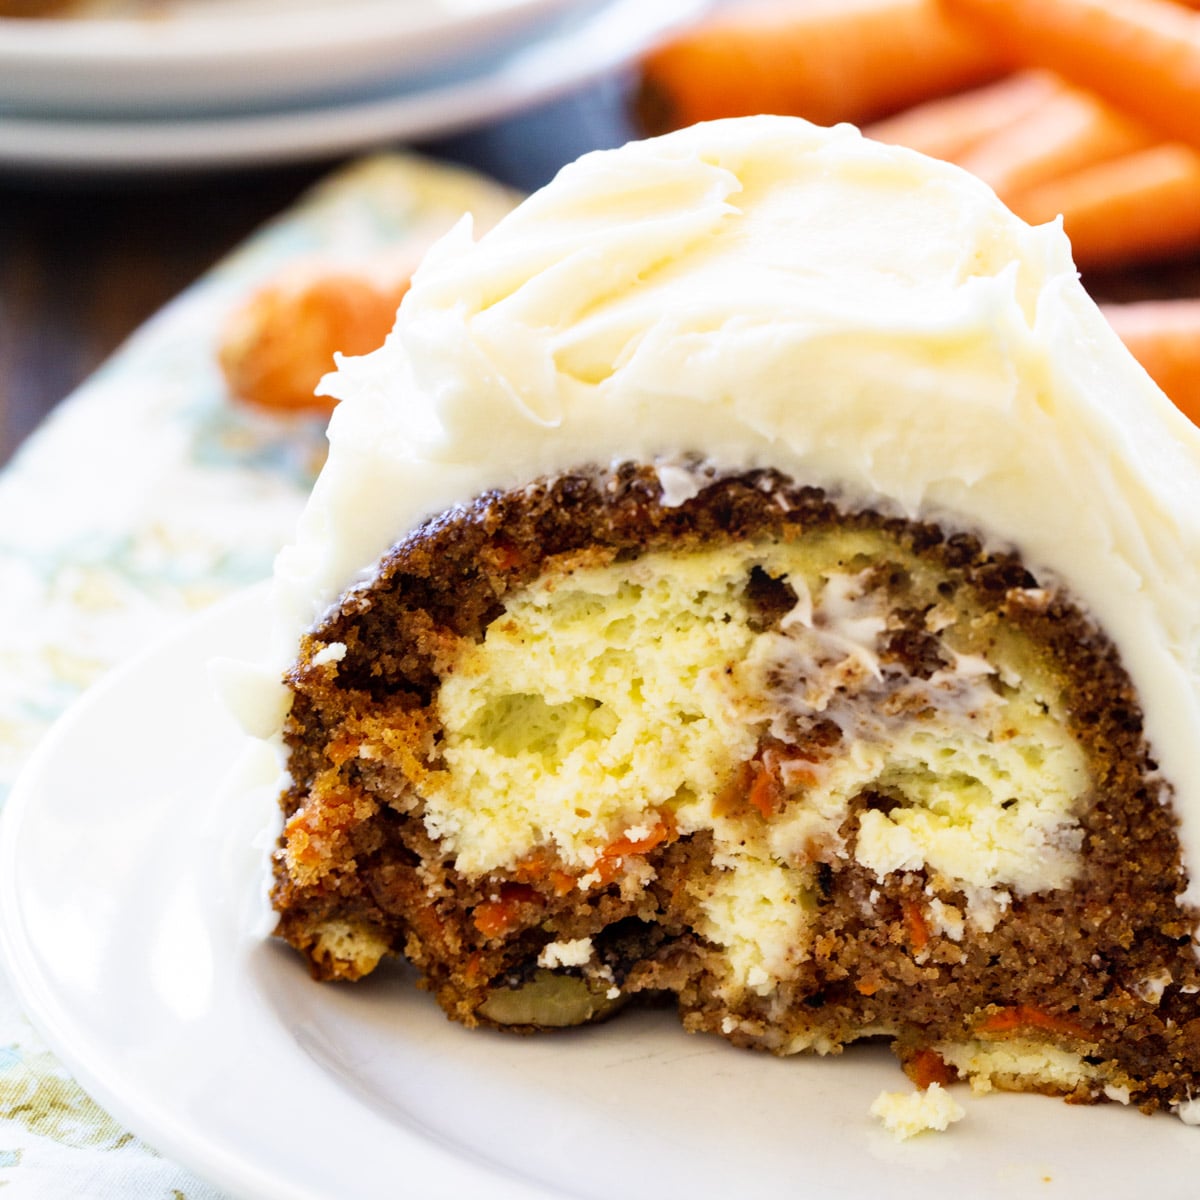 Slice of Cream Cheese Filled Carrot Cake on a plate.